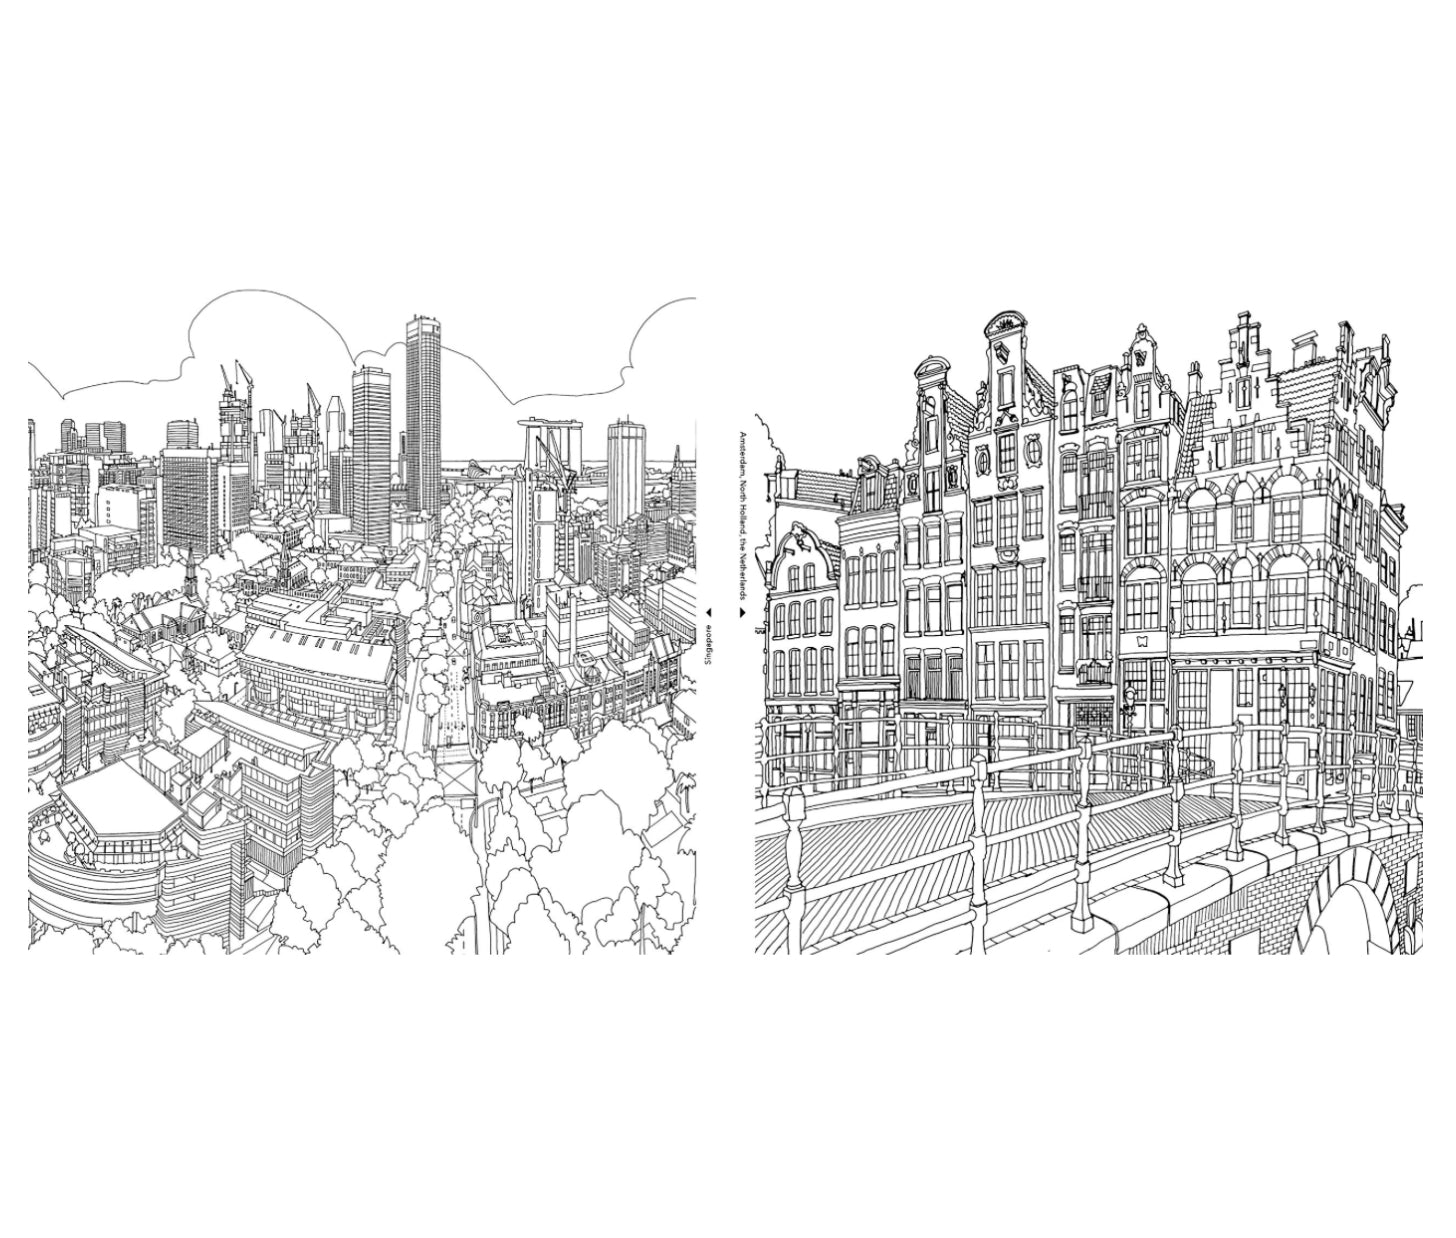 Colouring Book - Fantastic Cities